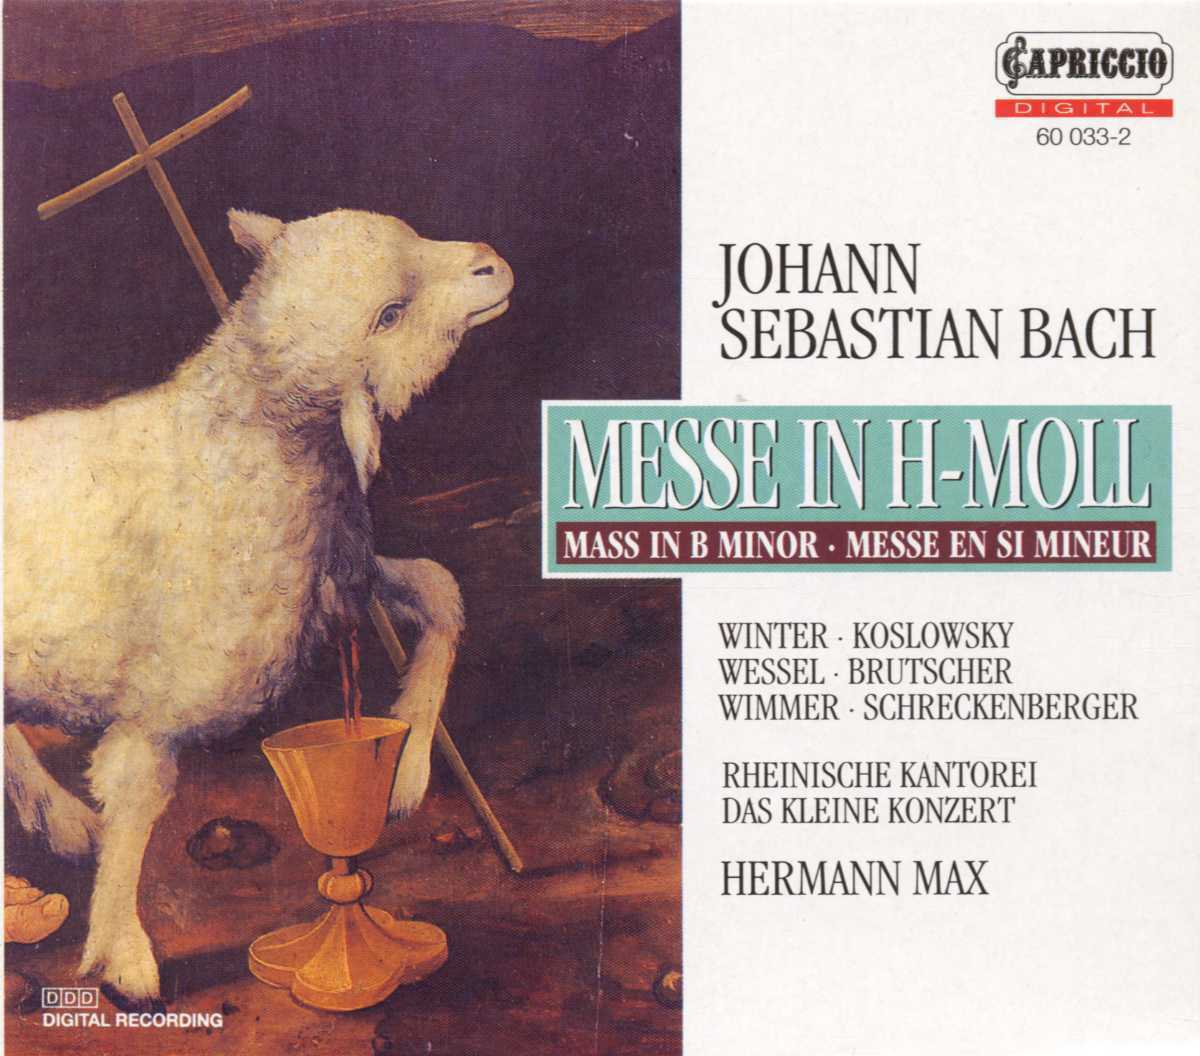 Bach: Messe in h-moll